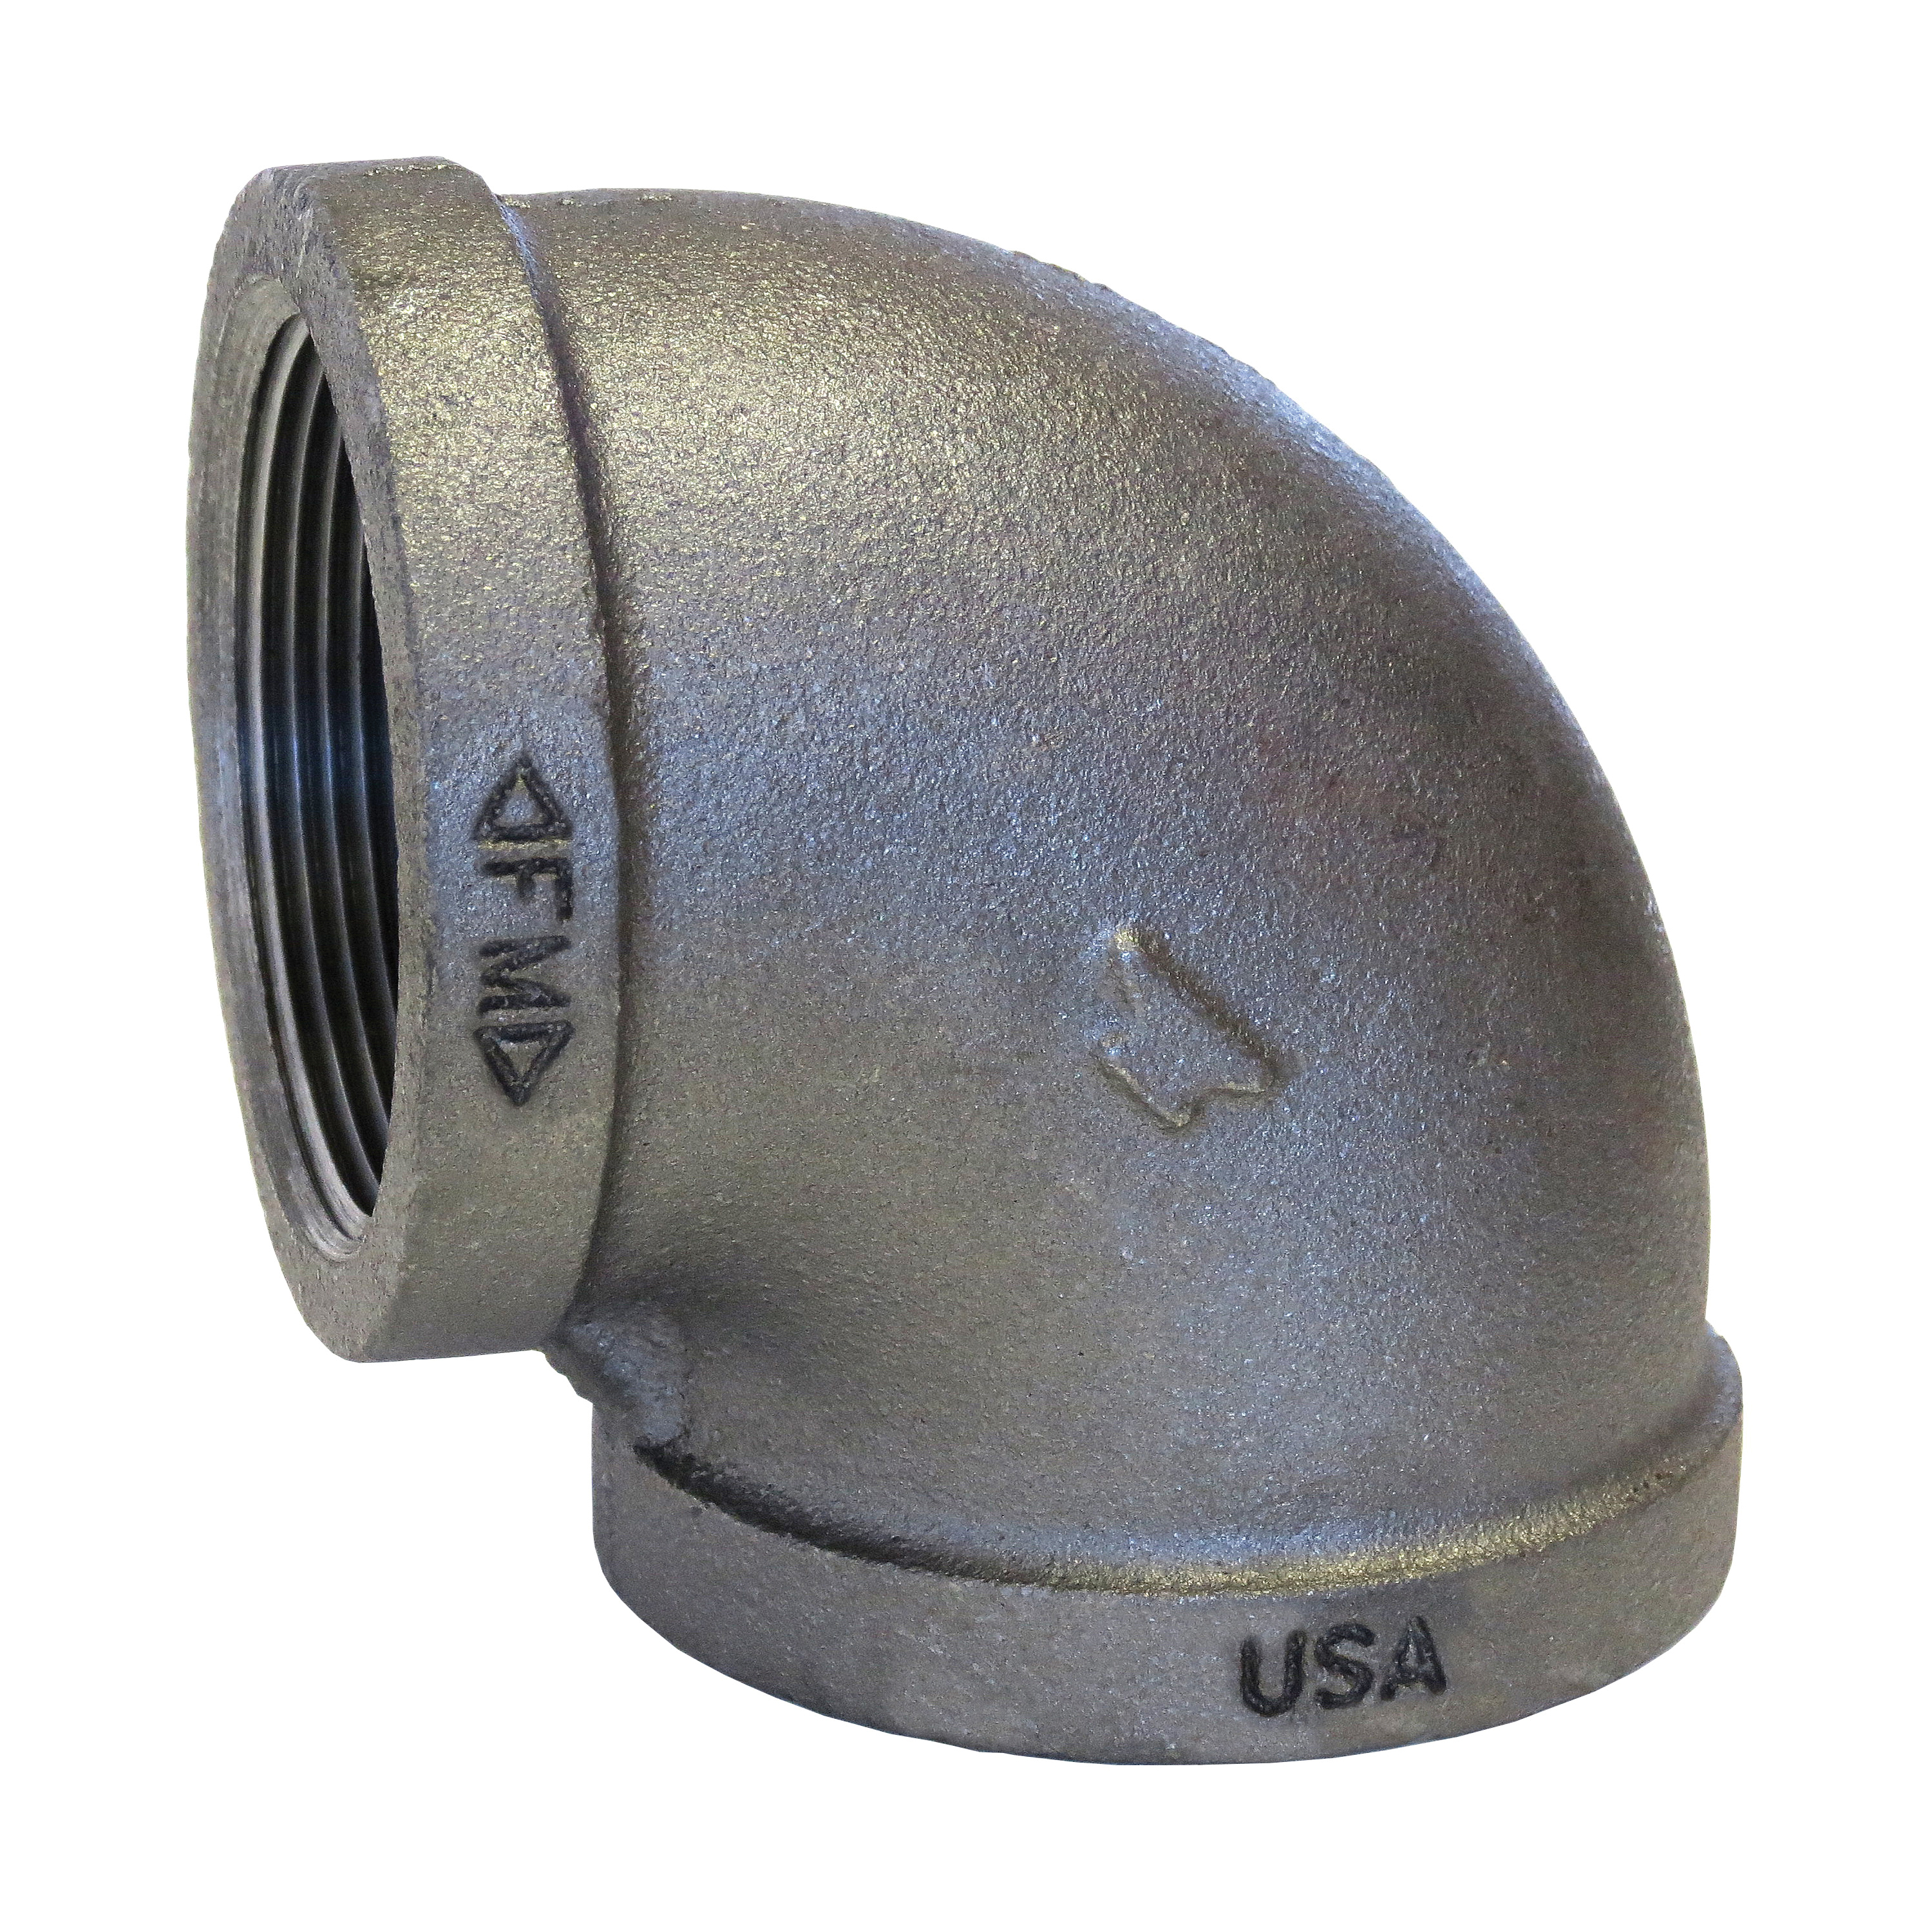 SPF/Anvil™ 0811001007 FIG 3101 90 deg Pipe Elbow, 3/4 in Nominal, FNPT End Style, 150 lb, Malleable Iron, Galvanized, Import